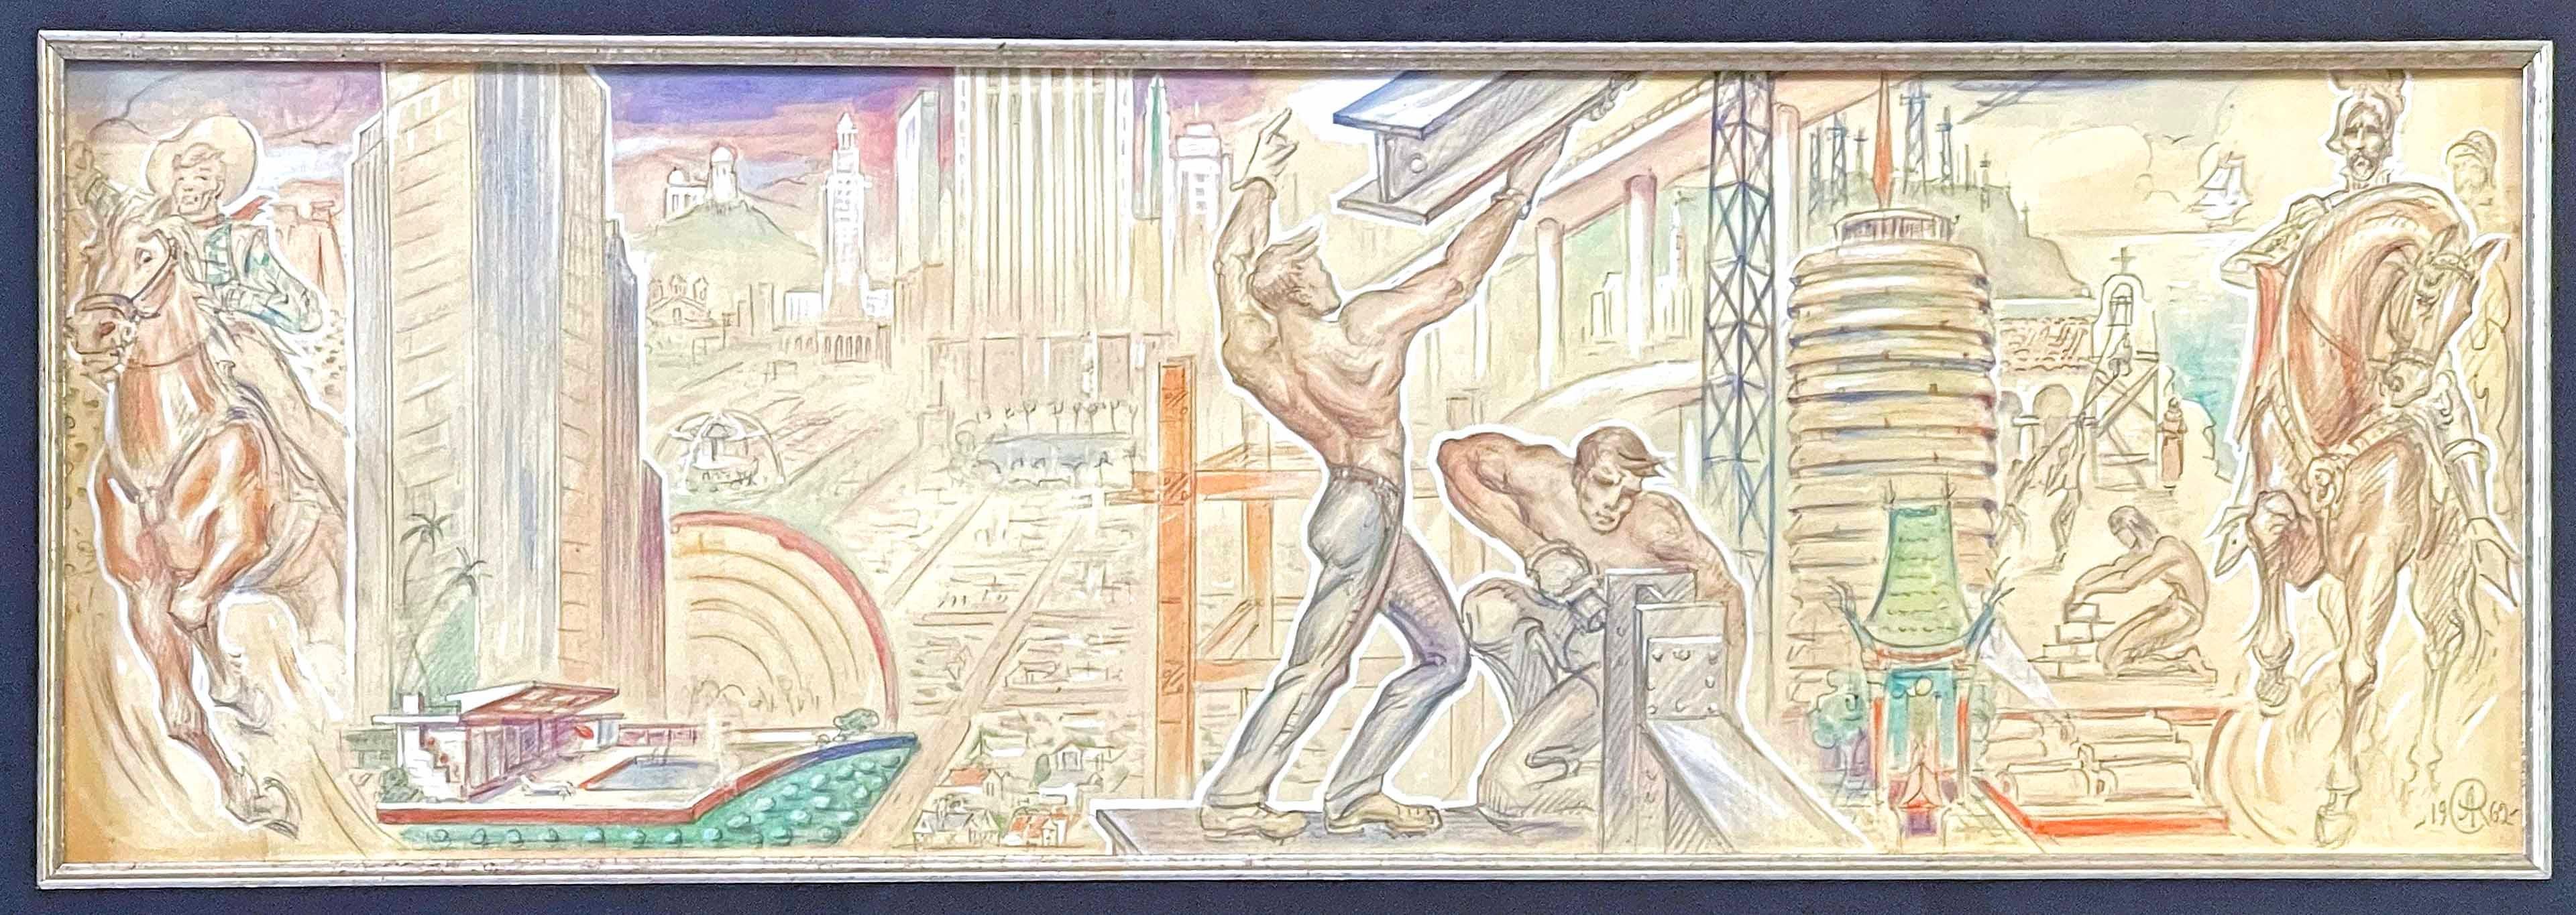 A late entry in America's string of public murals painted in the 1930s, 40s and 50s telling the story of various towns and regions, this 1962 Art Deco study by Alexander Rosenfeld presents an array of modern and historical figures to relate the